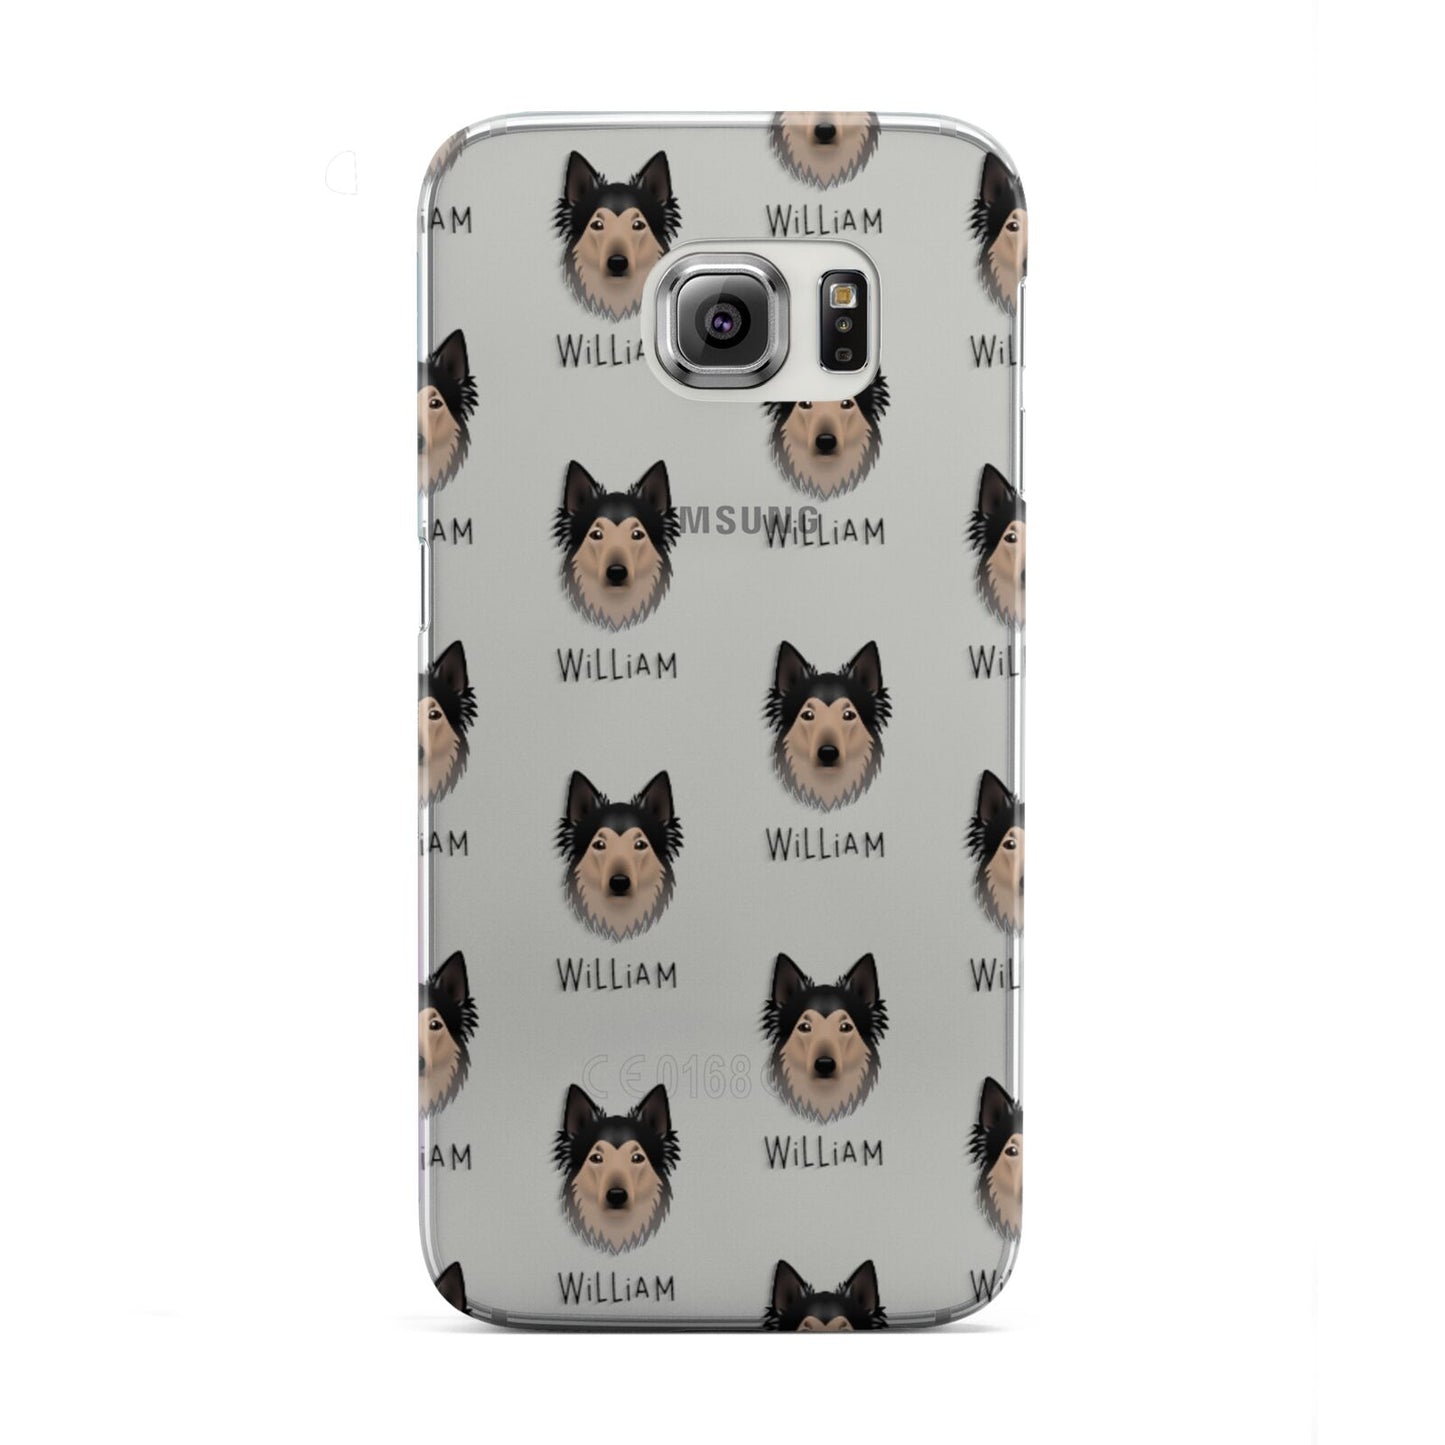 Shollie Icon with Name Samsung Galaxy S6 Edge Case